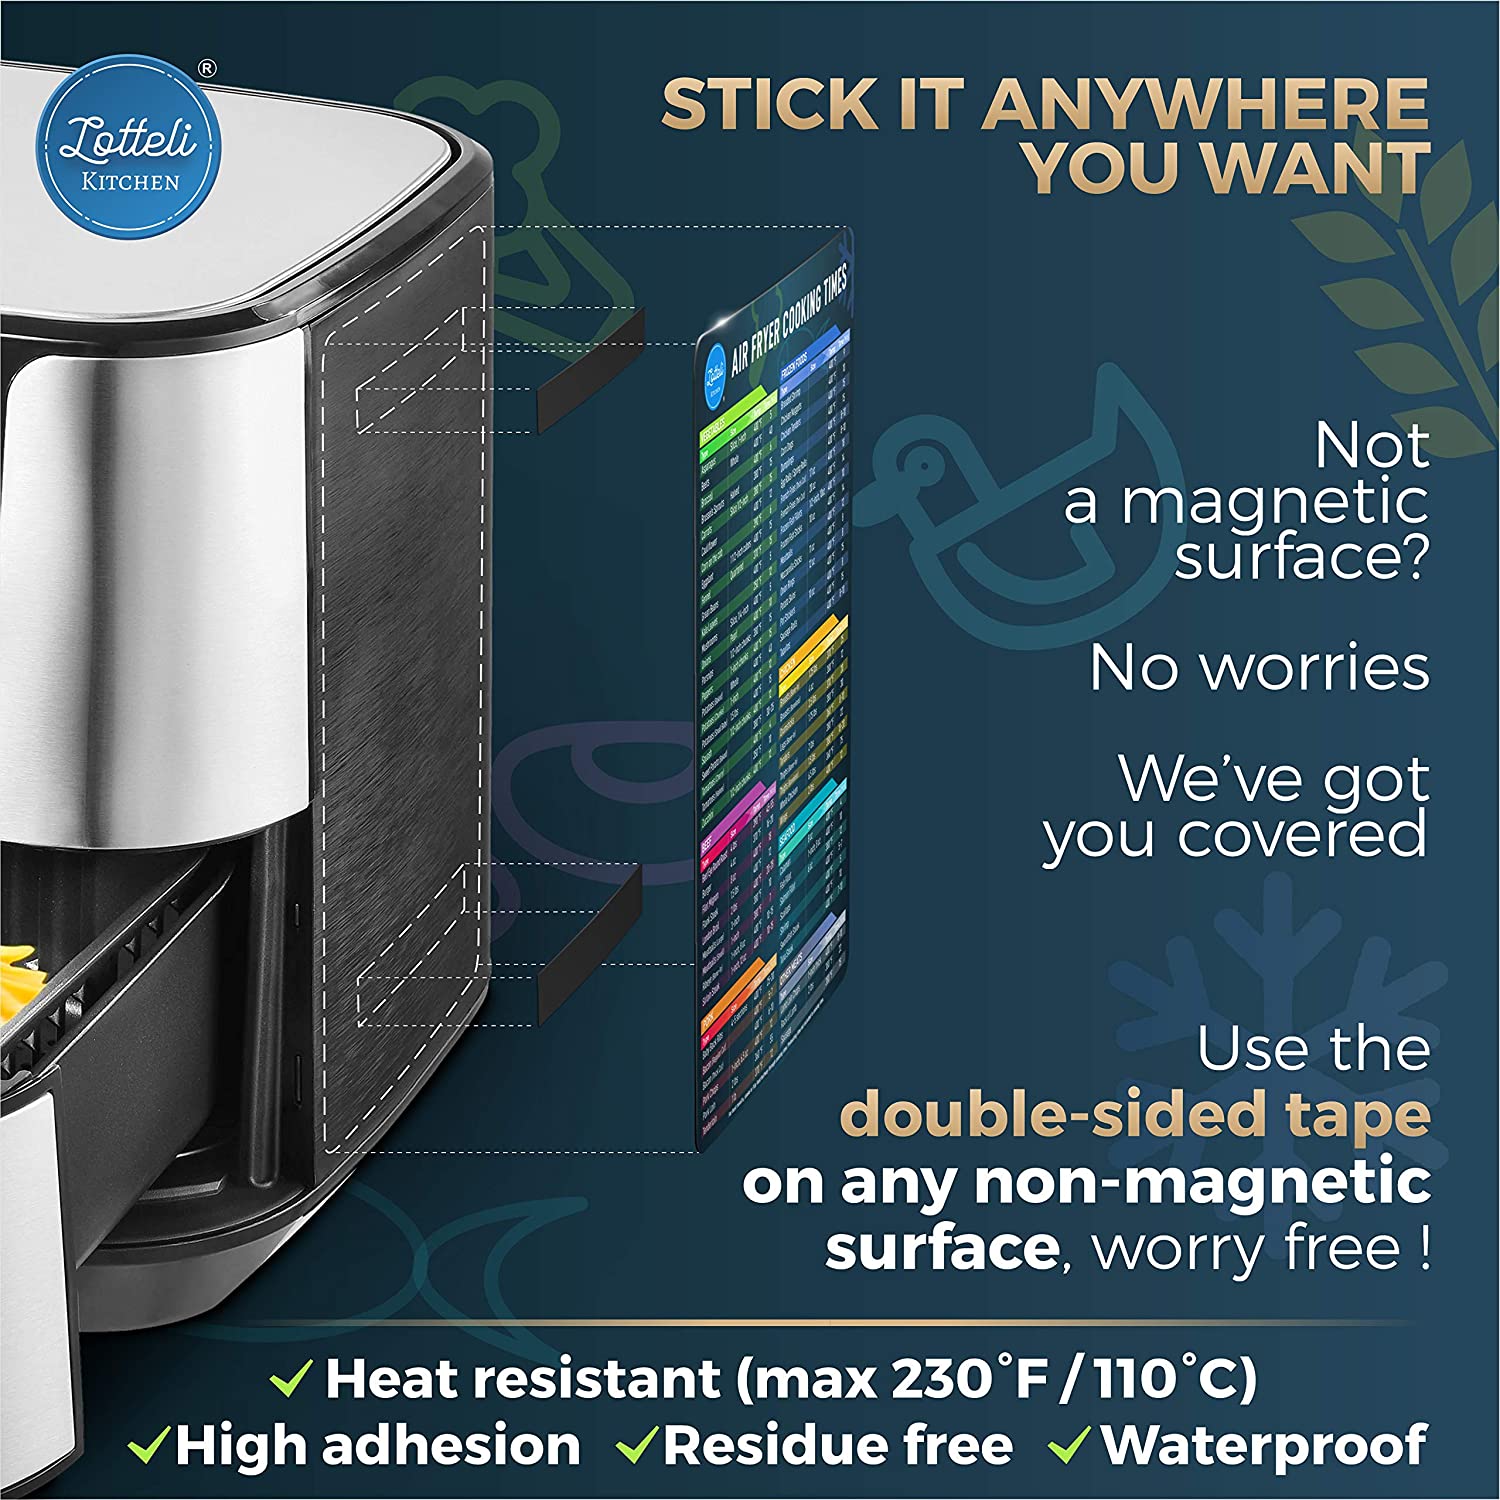 A diagram of an air fryer showing a magnetic cheat sheet being attached to the side of the fryer. There is text which says, 'Stick it anywhere you want. Heat resistant, high adhesion, residue free, waterproof.'